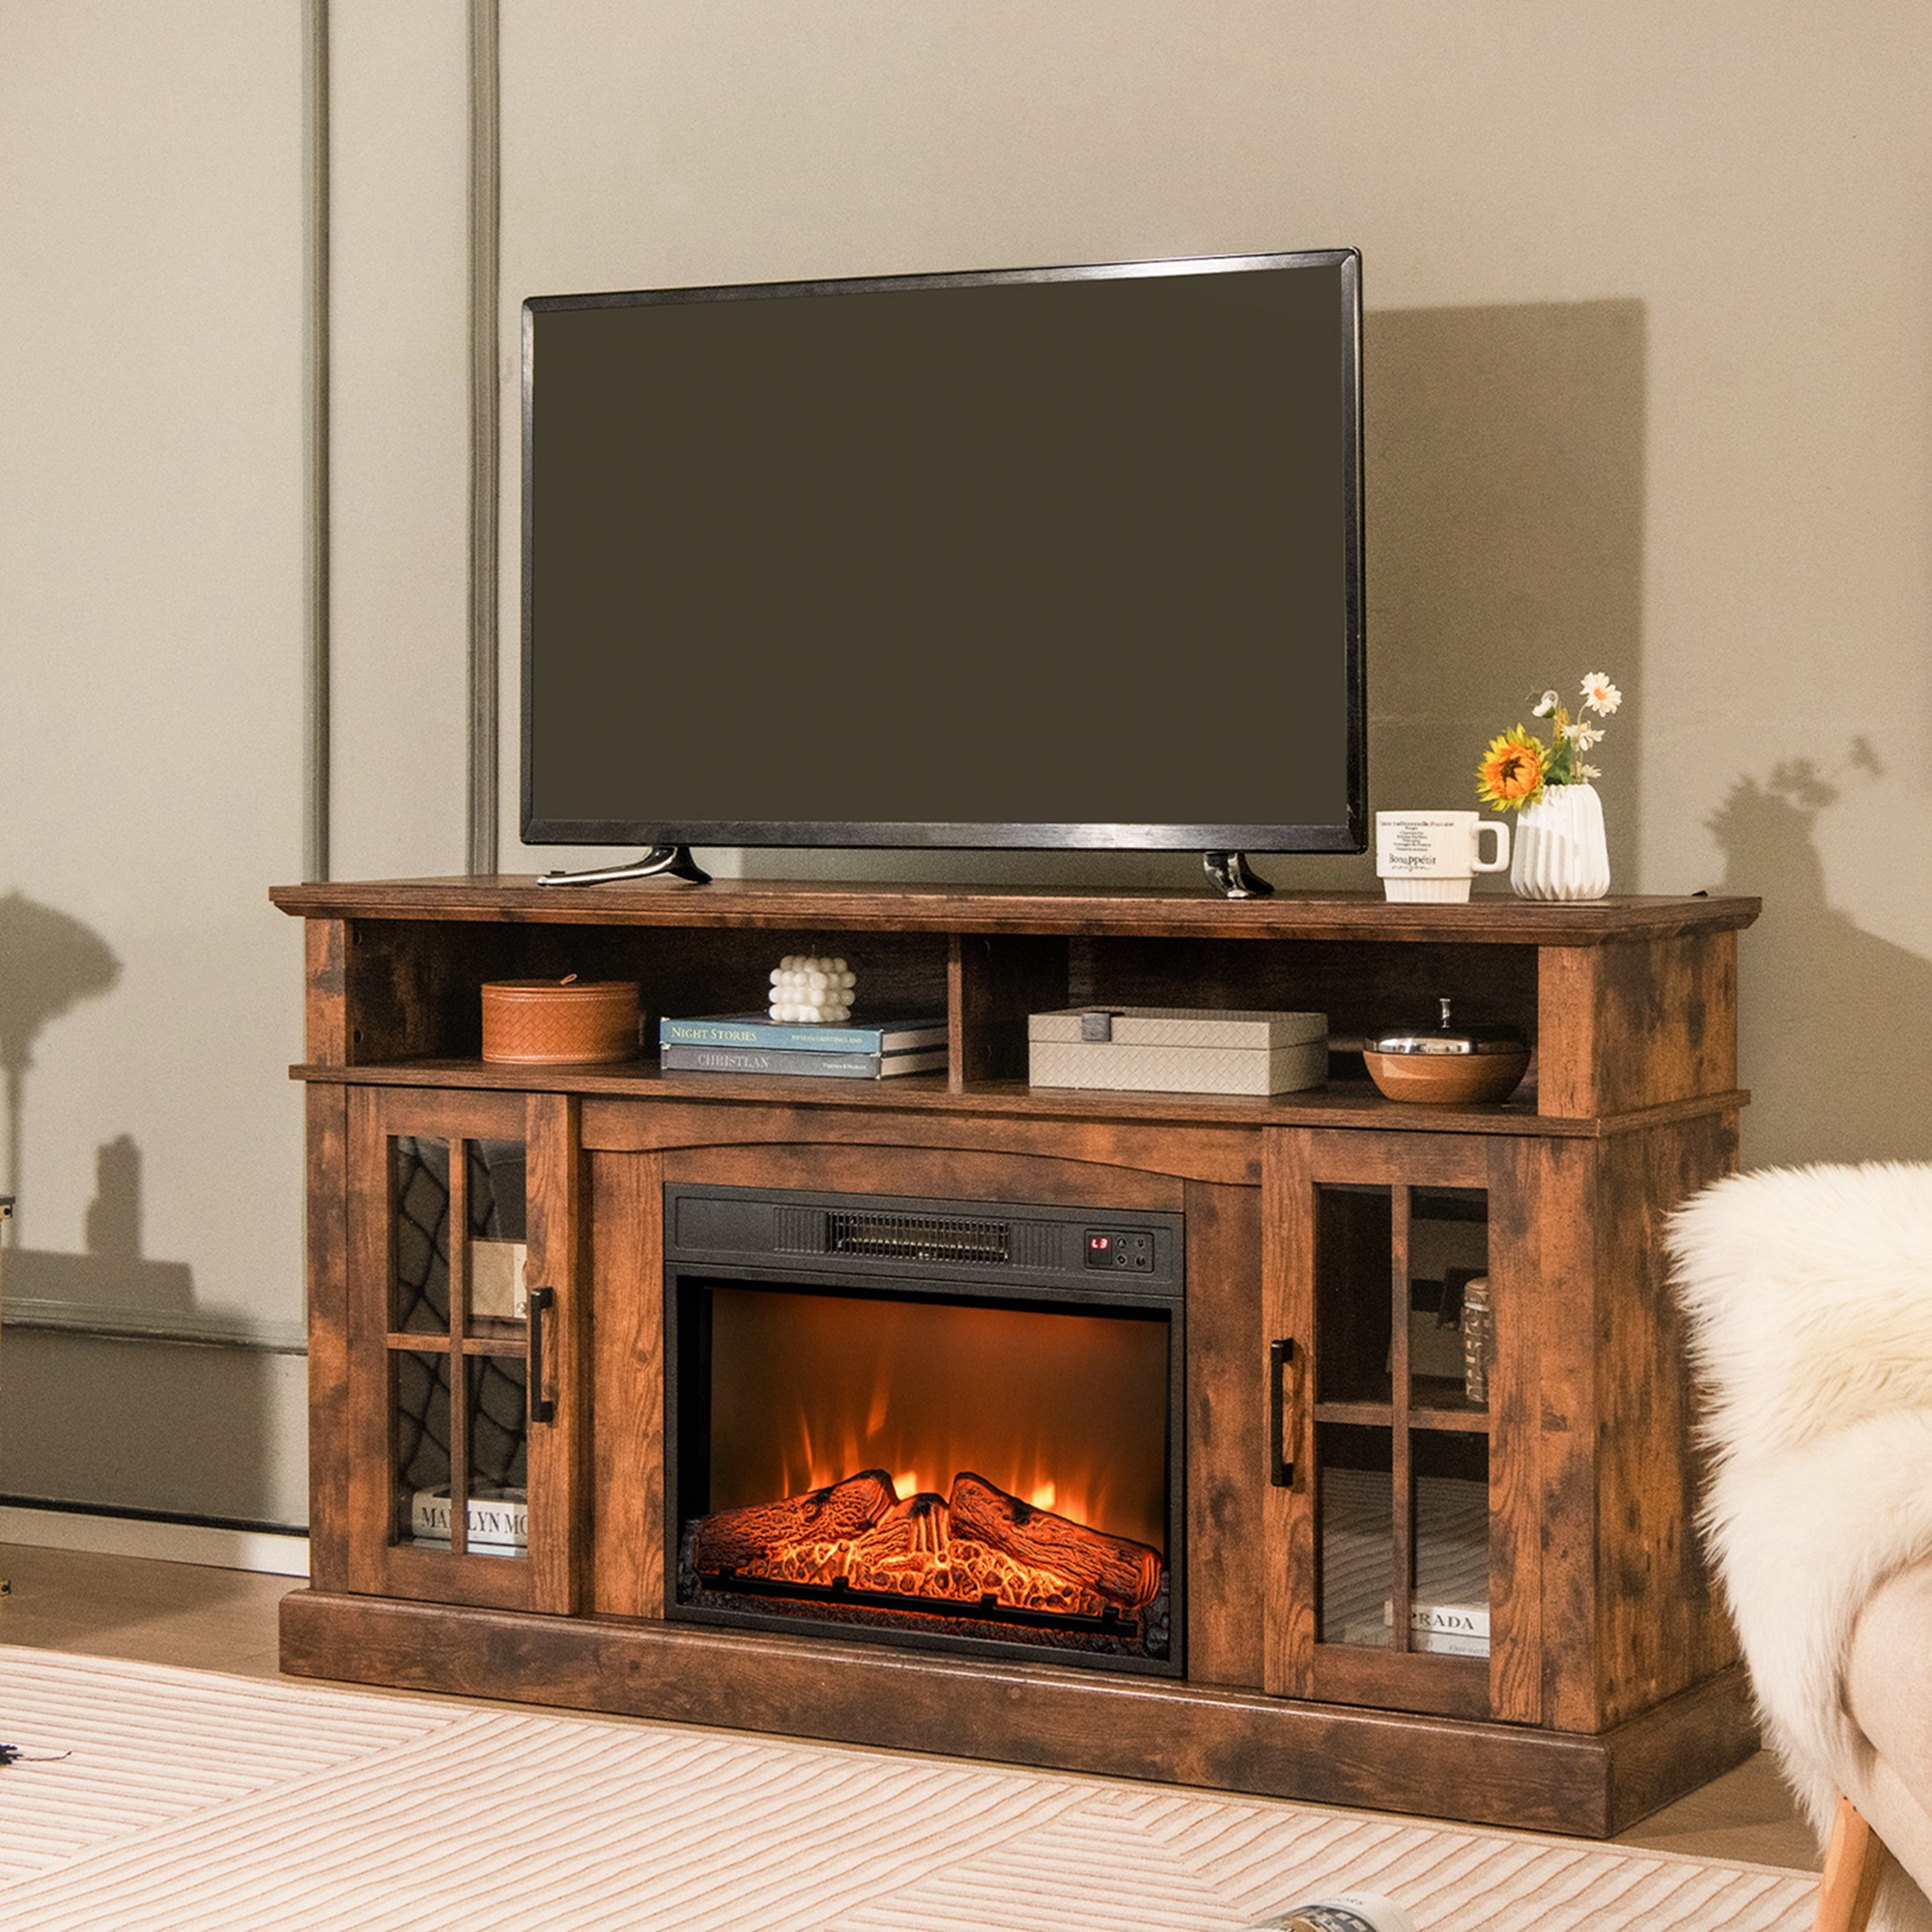 Costway 23" Electric Fireplace Insert Heater w/ Log Flame Effects Remote Control 1400W